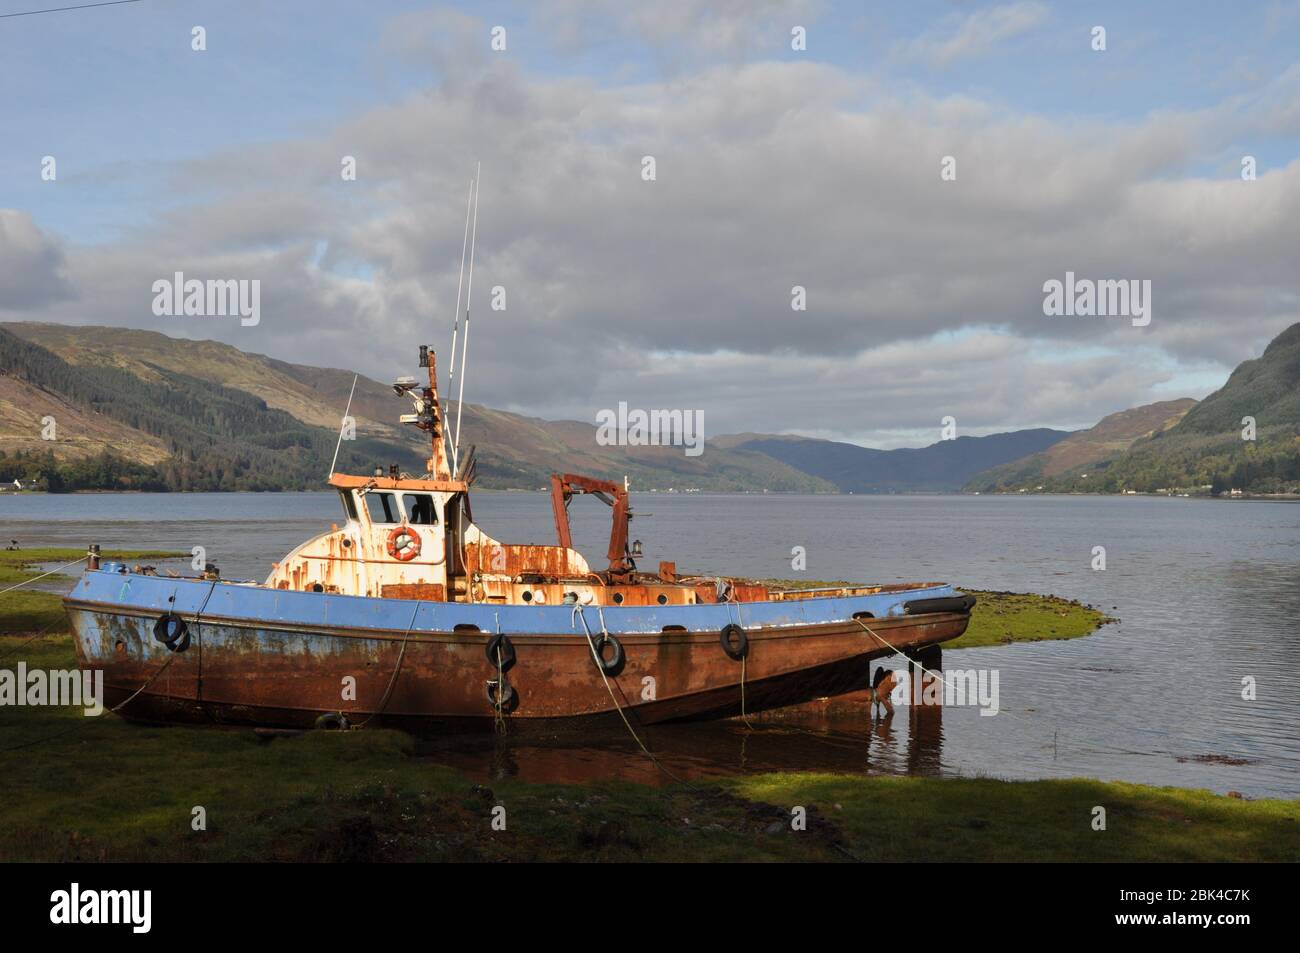 Fishing boat on the shore of Loch Duich at Invershiel, Highland Scotland Stock Photo